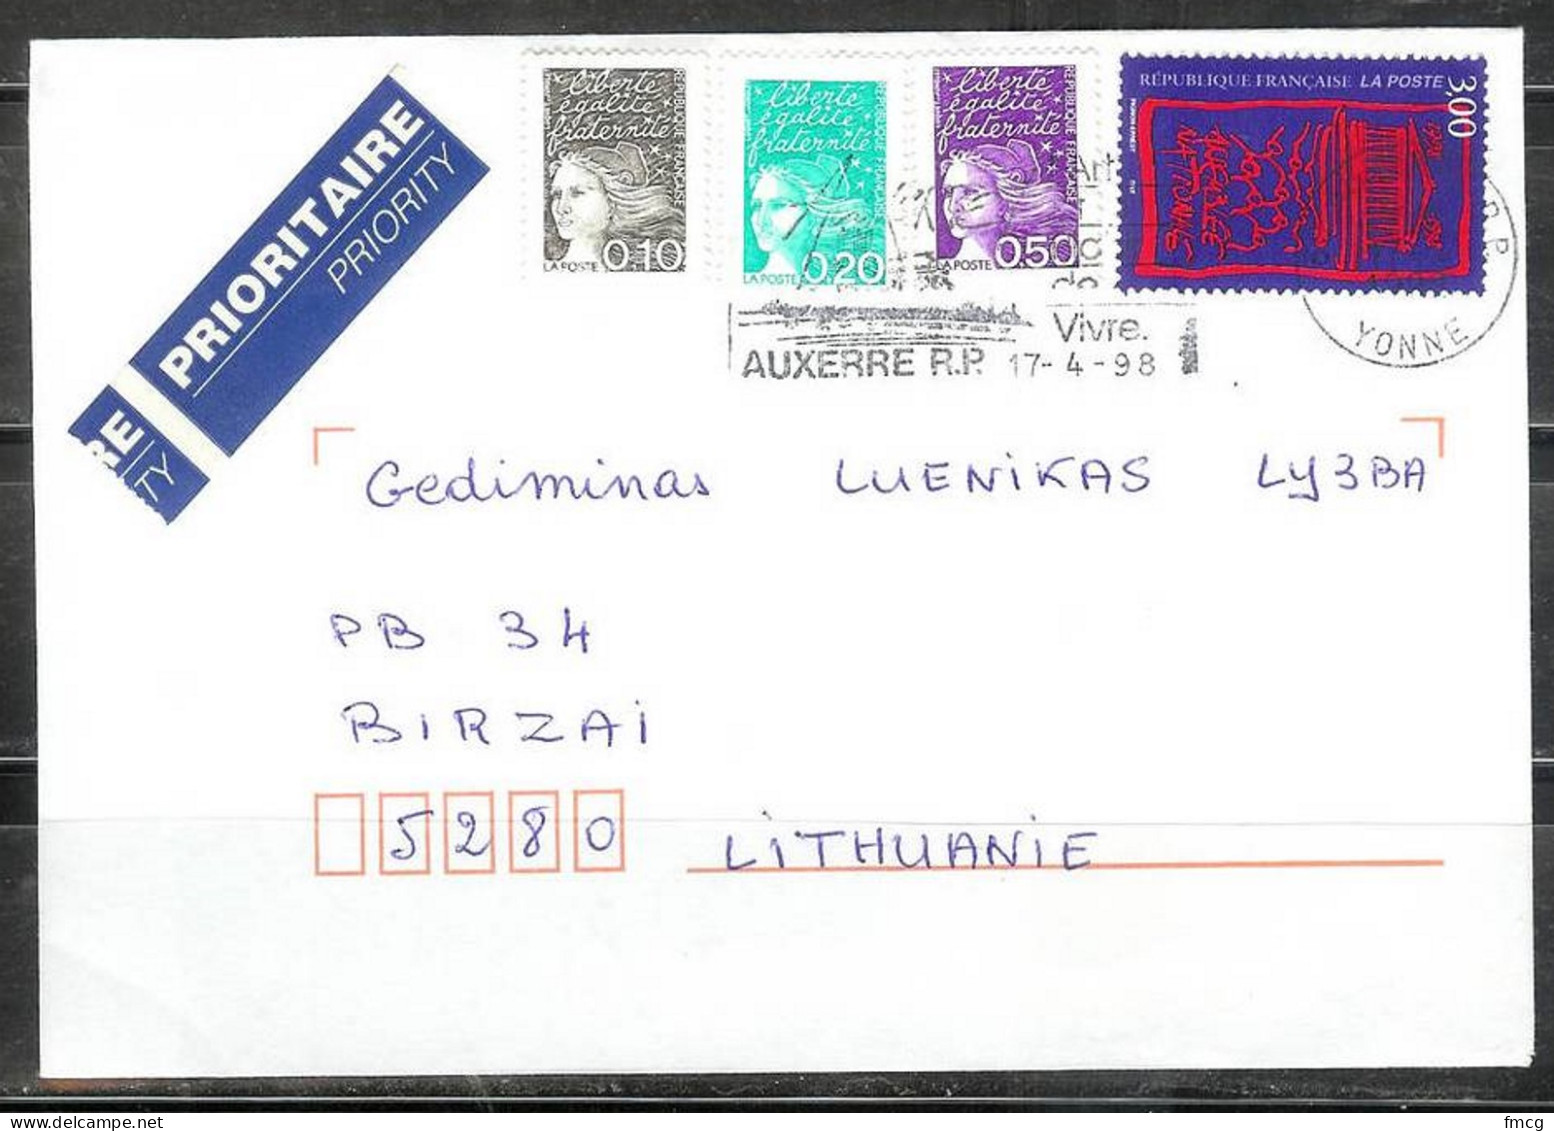  1998 National Assembly, Auxerre (17-4-98) To Lithuania - Cartas & Documentos